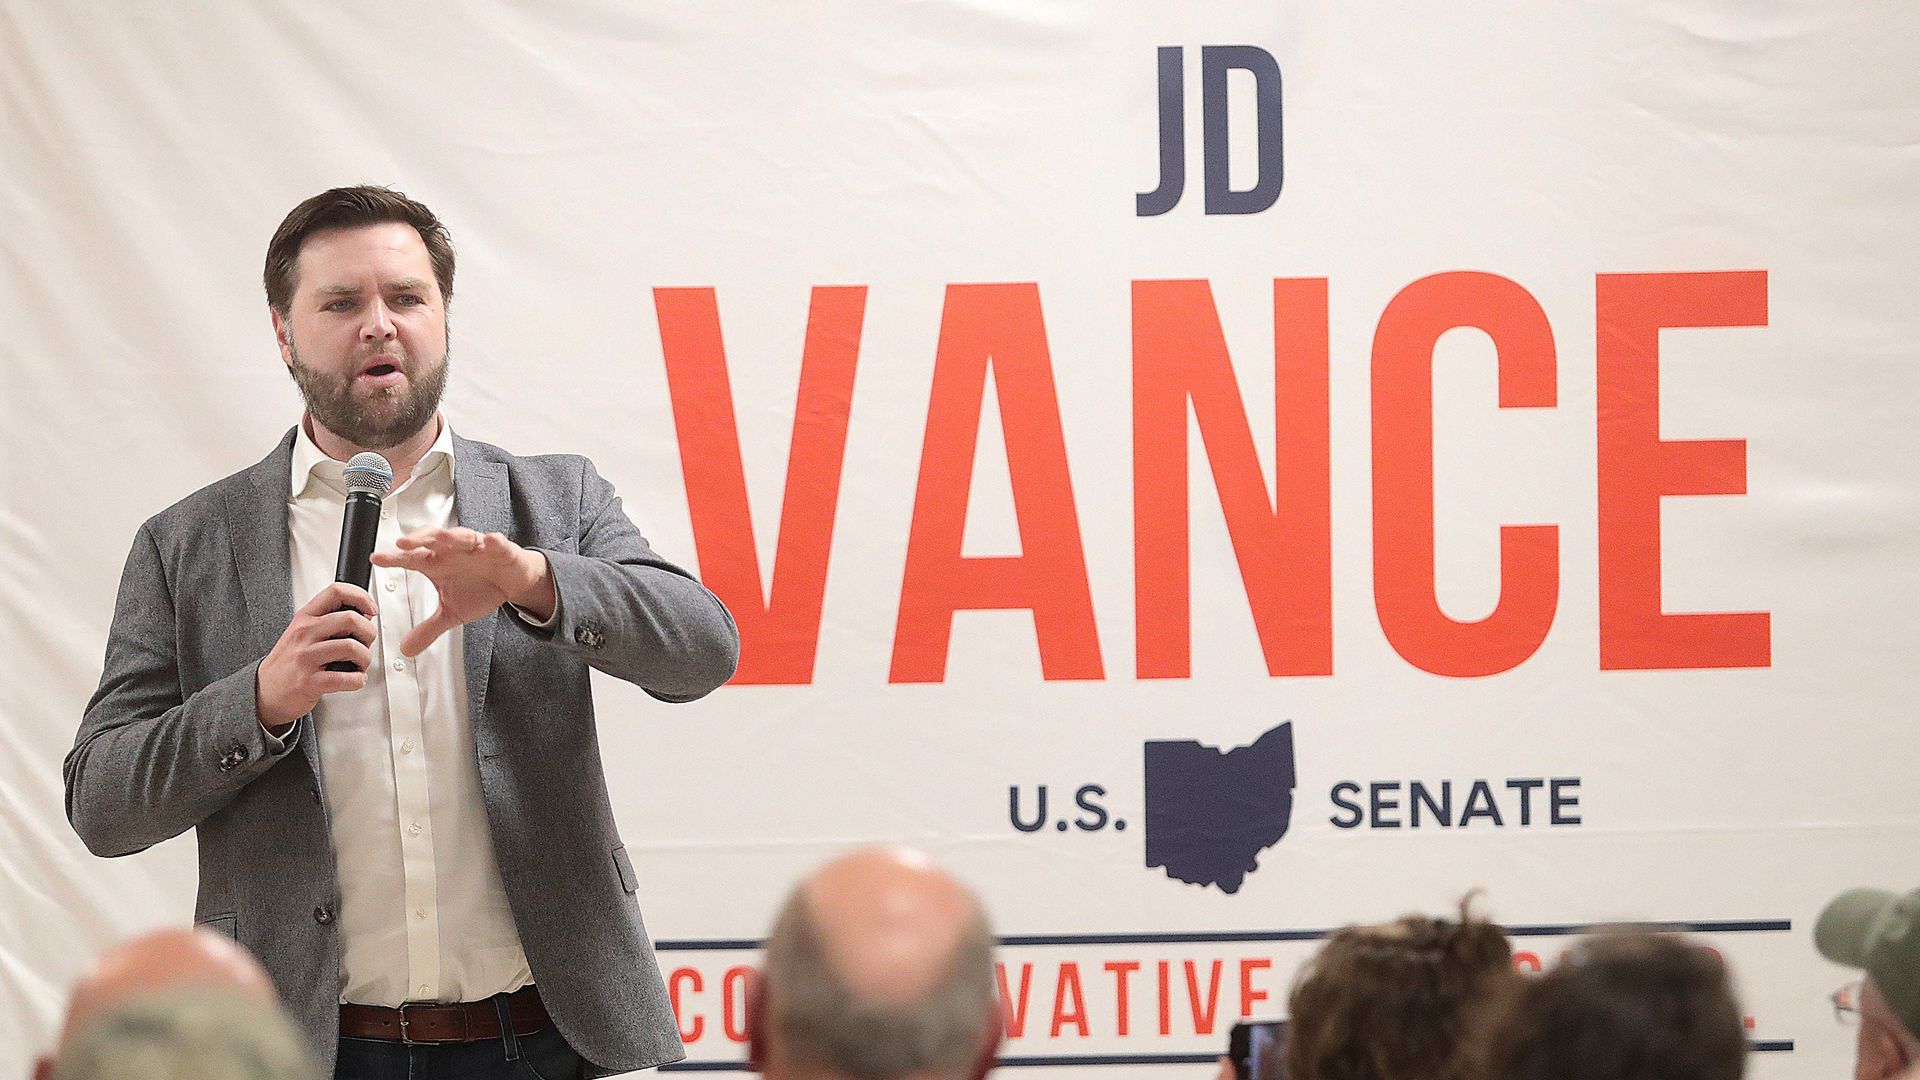 Image of JD Vance speaking to a crowd. 